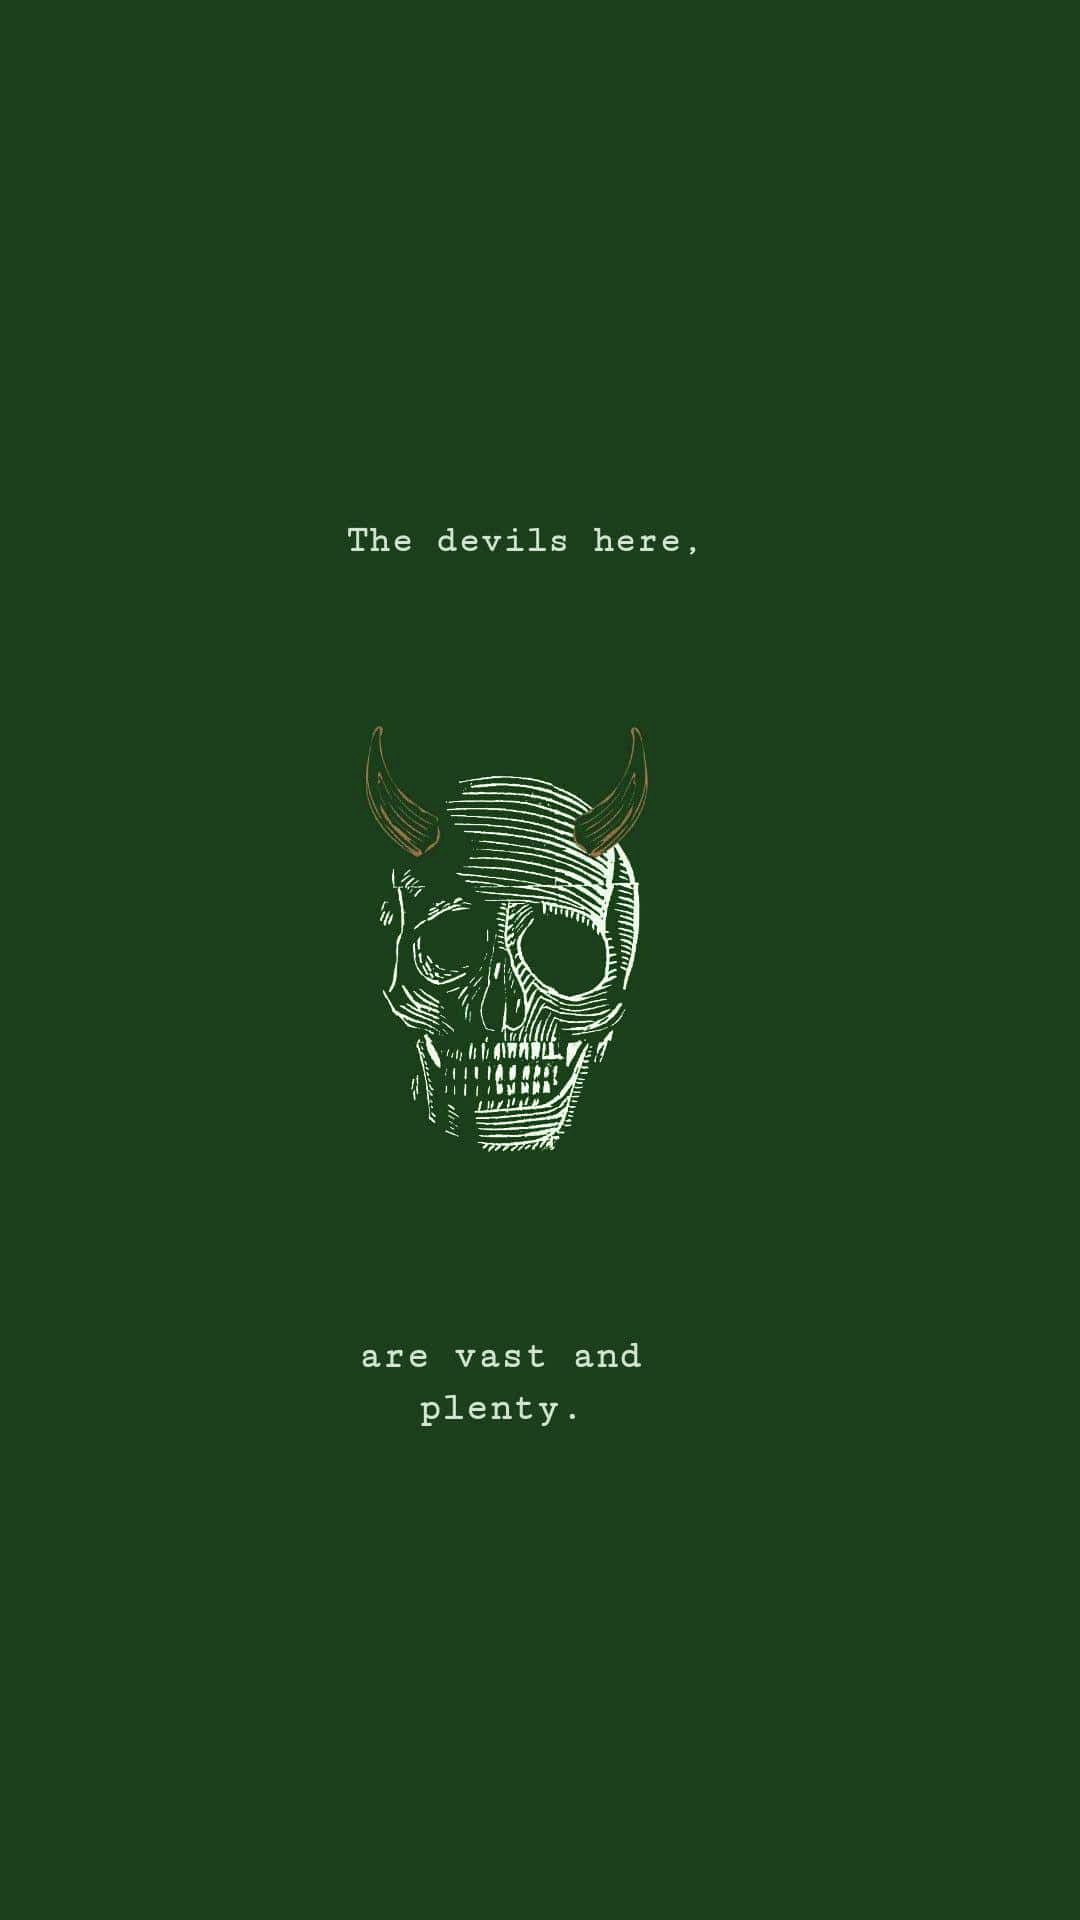 The devils here, are vast and plenty. - Black quotes